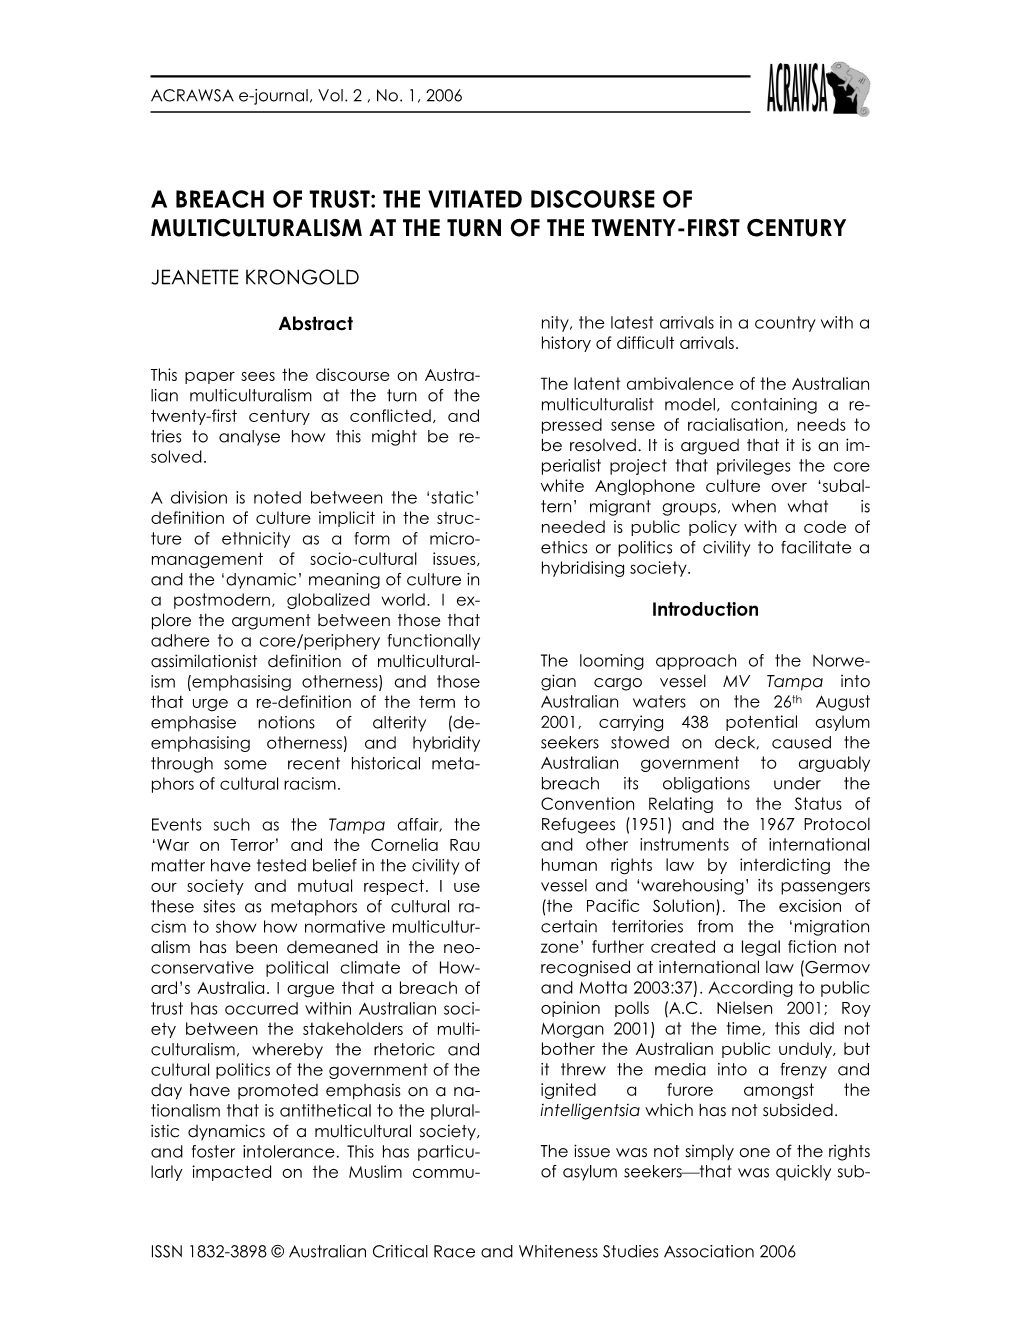 A Breach of Trust: the Vitiated Discourse of Multiculturalism at the Turn of the Twenty-First Century